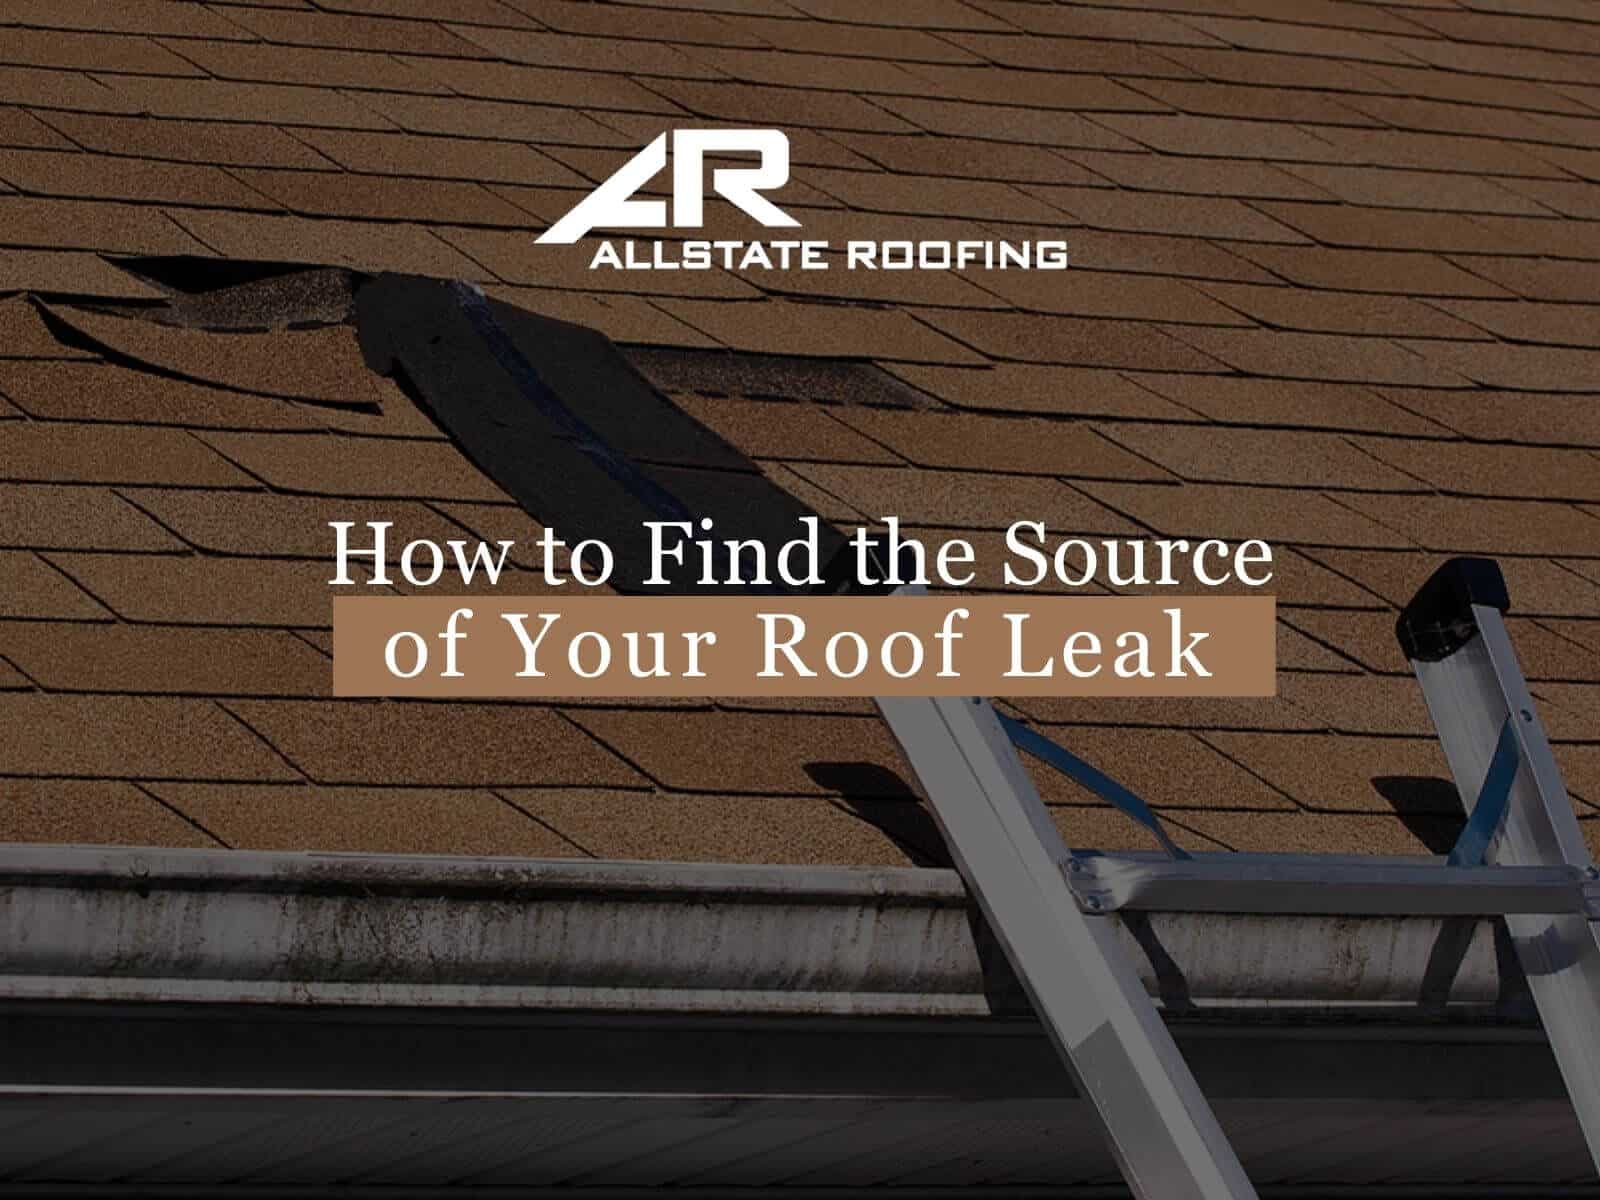 How to Find the Source of Your Roof Leak